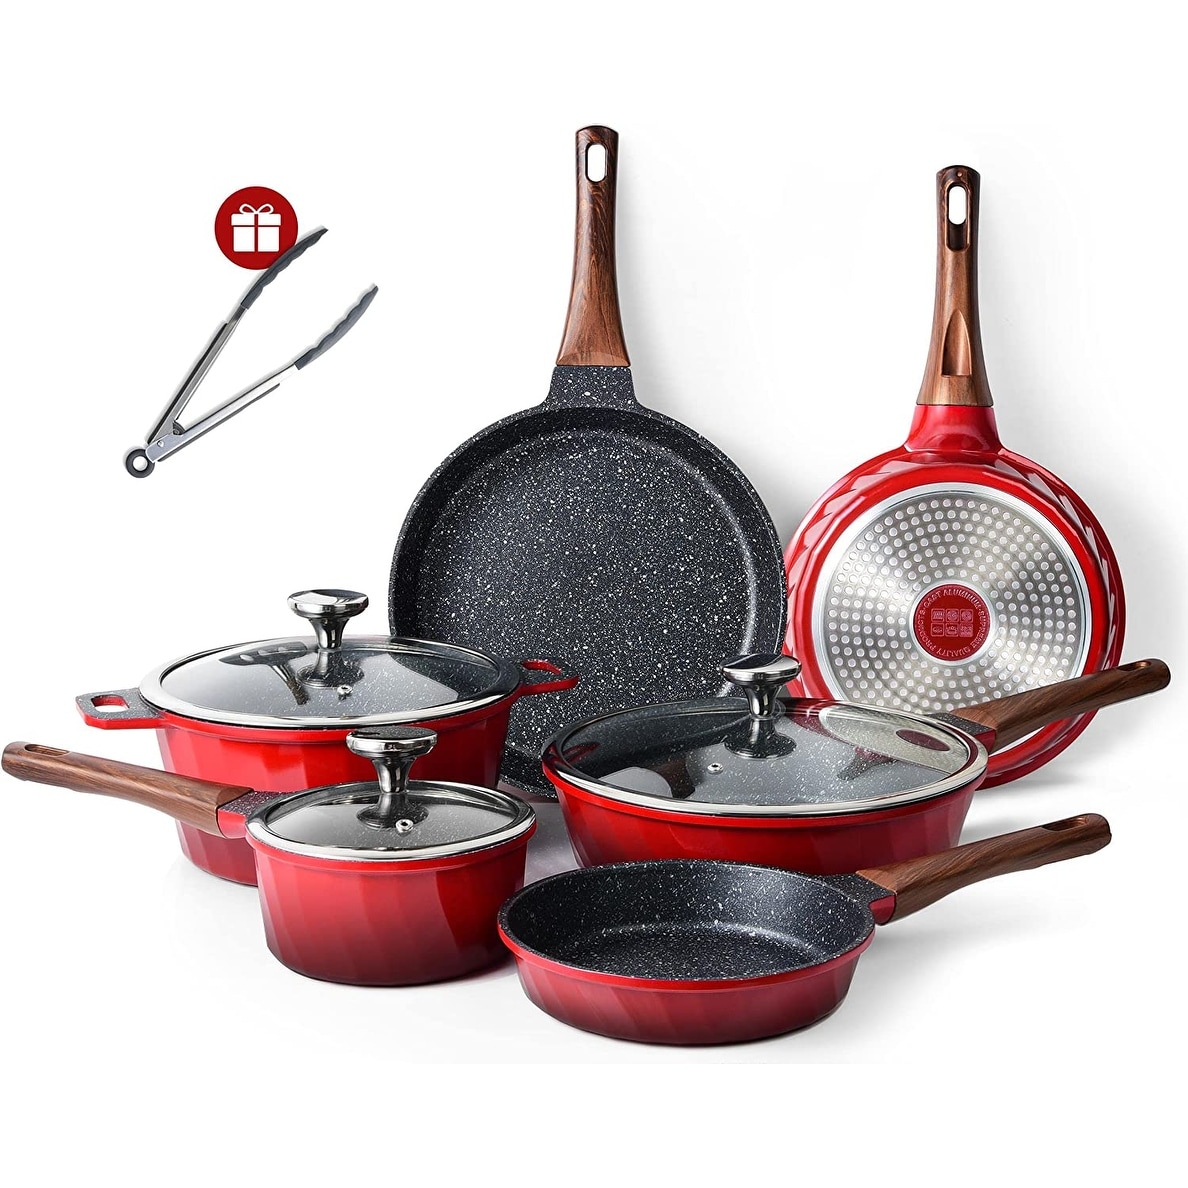 Nonstick Kitchen Cookware Set, Pots and Pans Set Healthy Induction Granite  Cooking Set W/Frying PansSaucepansDishwasher Safe